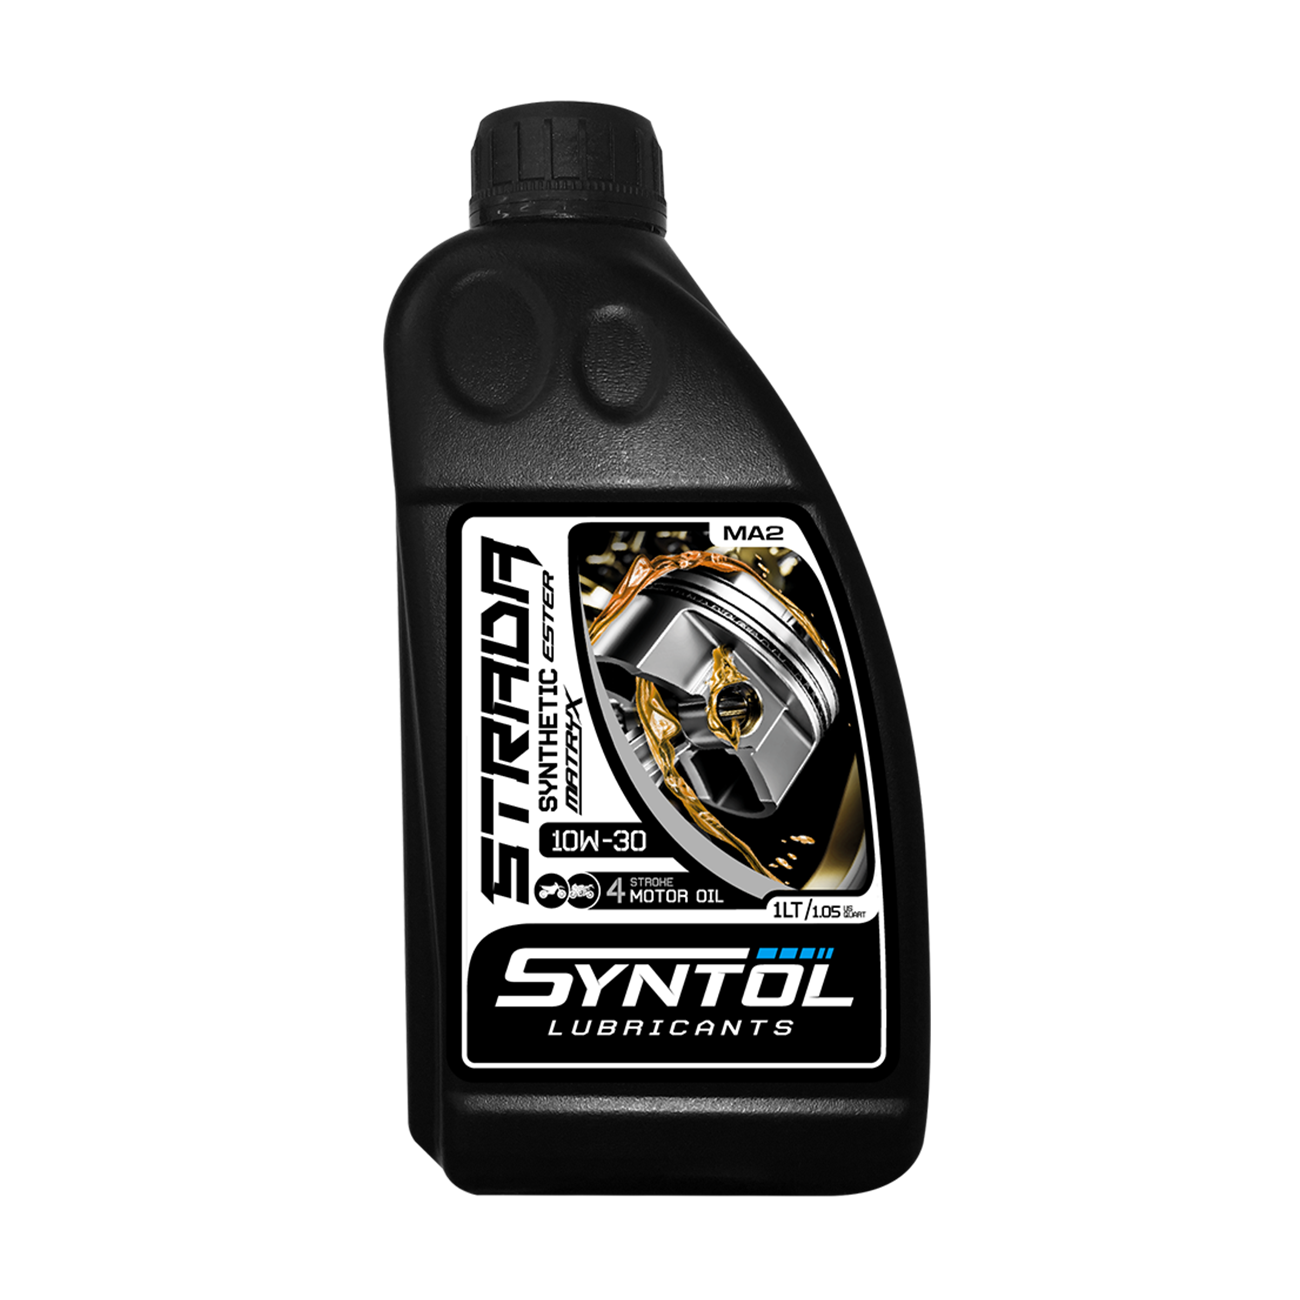 Syntol Strada 4T 10W-30 Motorcycle Engine Oil - 1 Litre-F0040-1-Oils and Lubricants-Pyramid Motorcycle Accessories